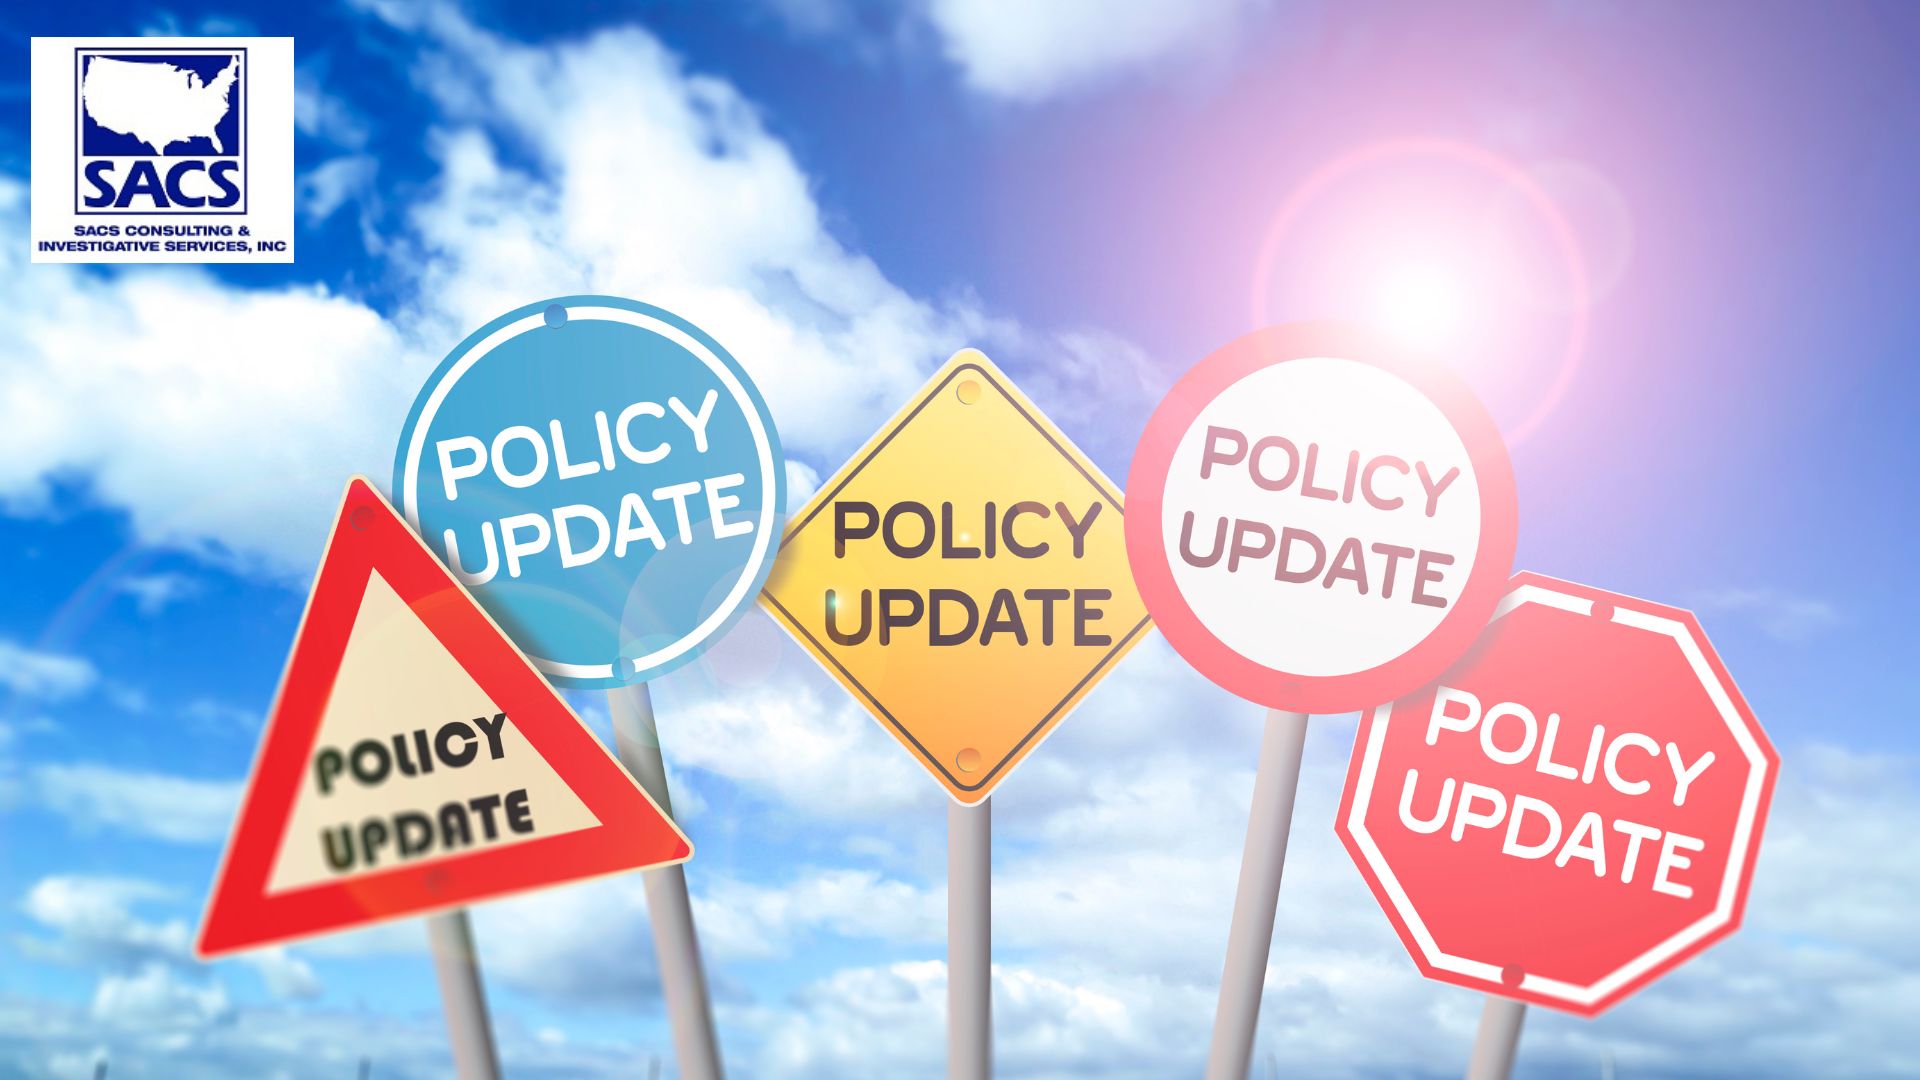 electronic communications policy, social media, policy, policy updates